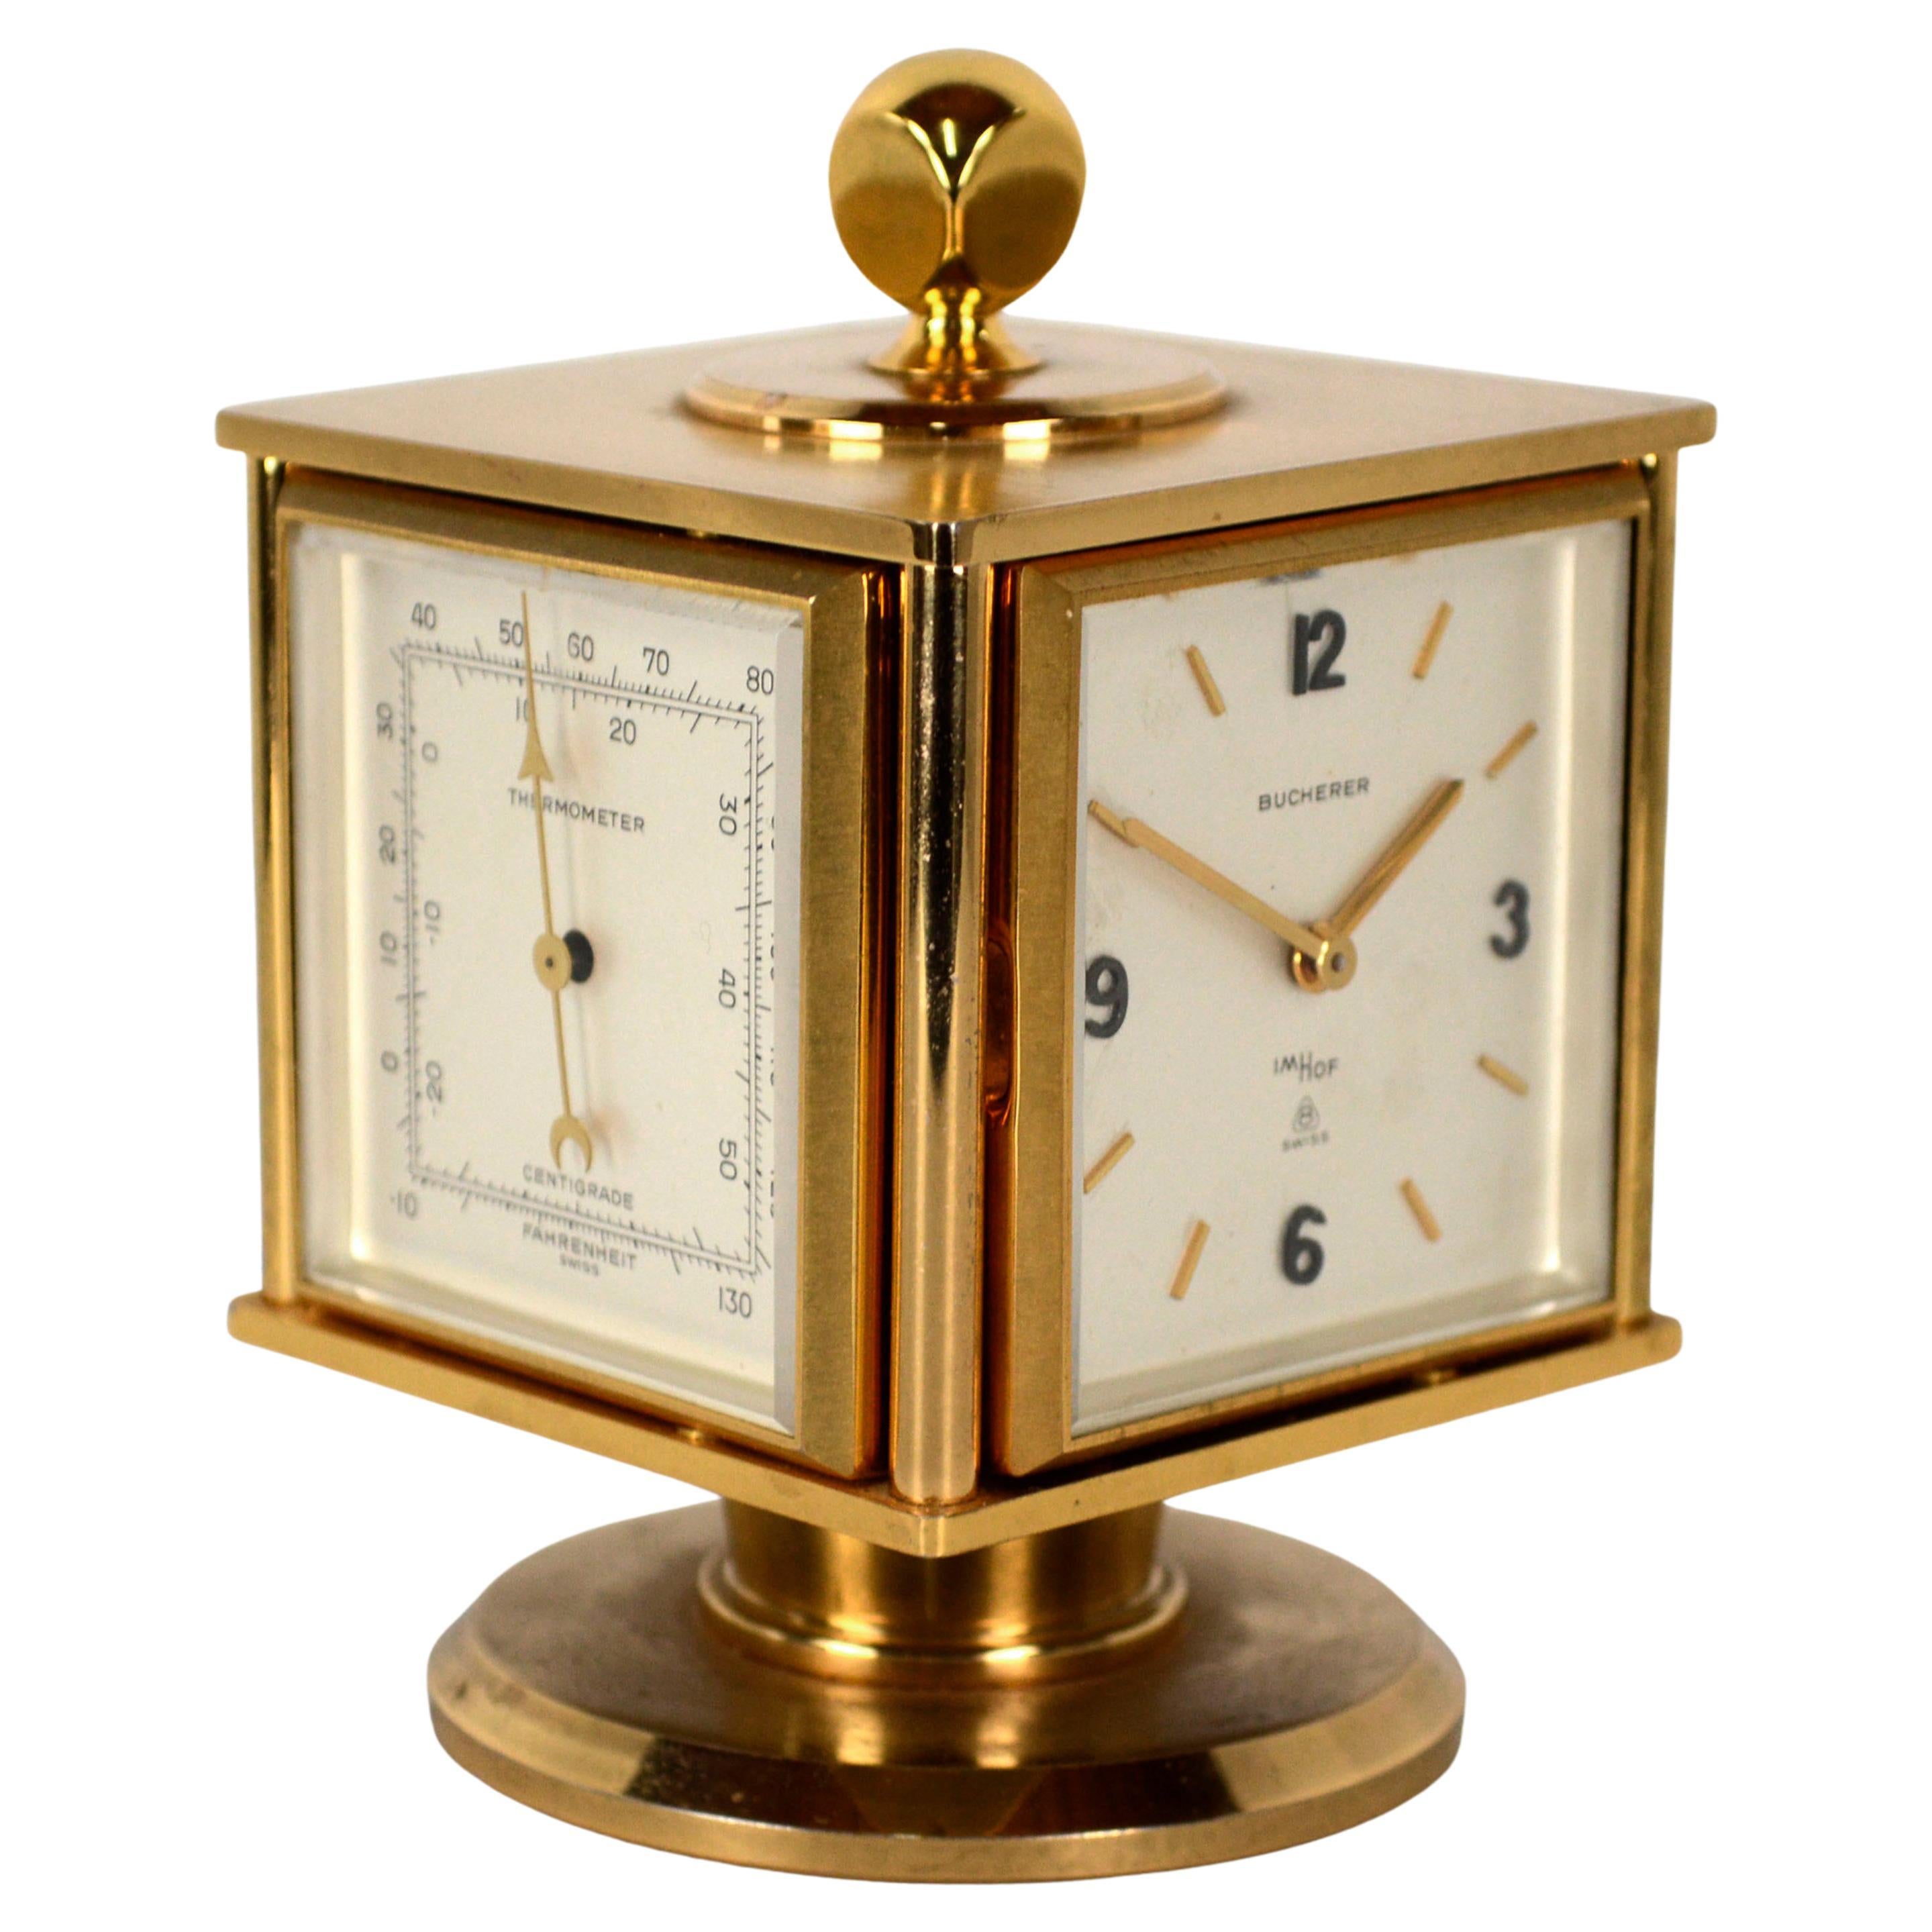 A wonderful Gold toned, brass weather station, 15 Jewel lever escapement, (Lever escapement is used in an accurate pocket watch) 8 day desk clock by Swiss clock makers Bucherer and Imhof. Four instruments are combined in this sleek and compact cube